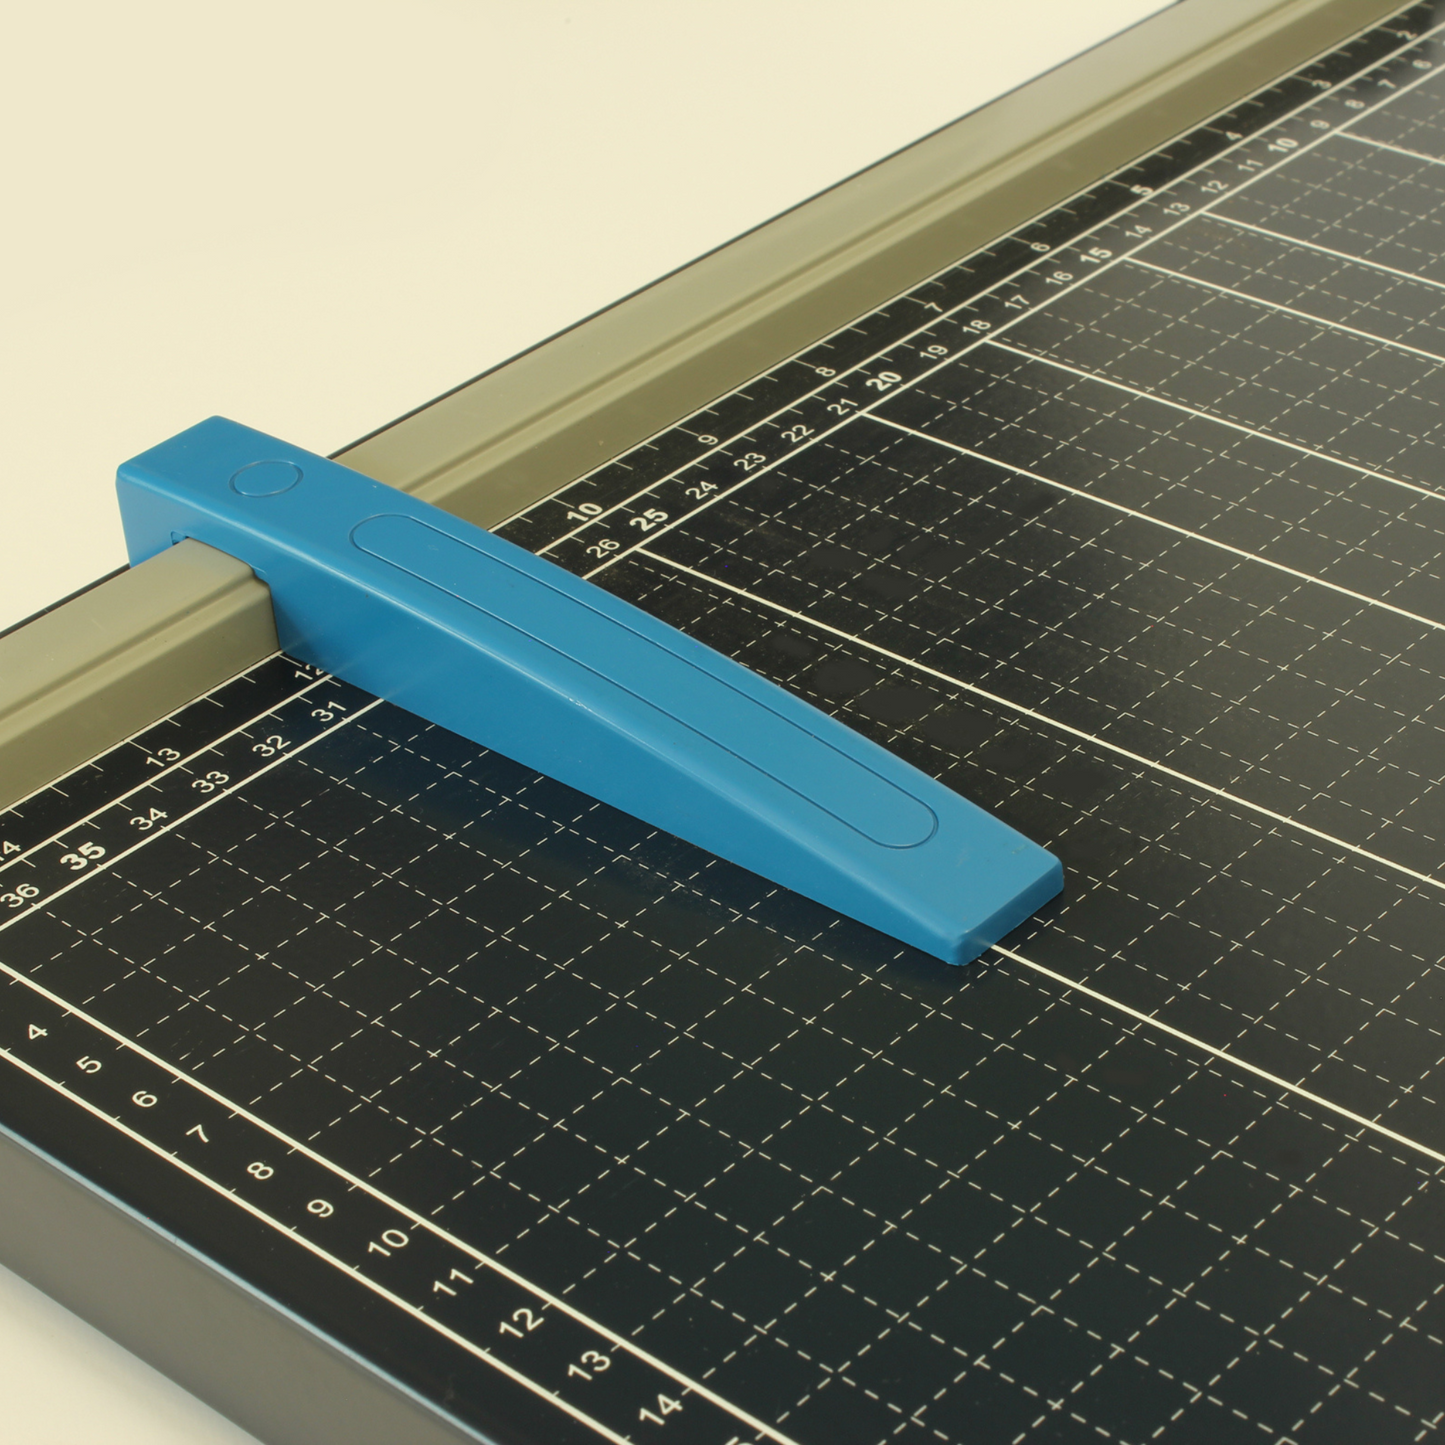 Close-up of the blue paper guide on an A3 paper guillotine cutter, set on a metal base with detailed grid lines and measurement markings, highlighting the tool's precision cutting feature.